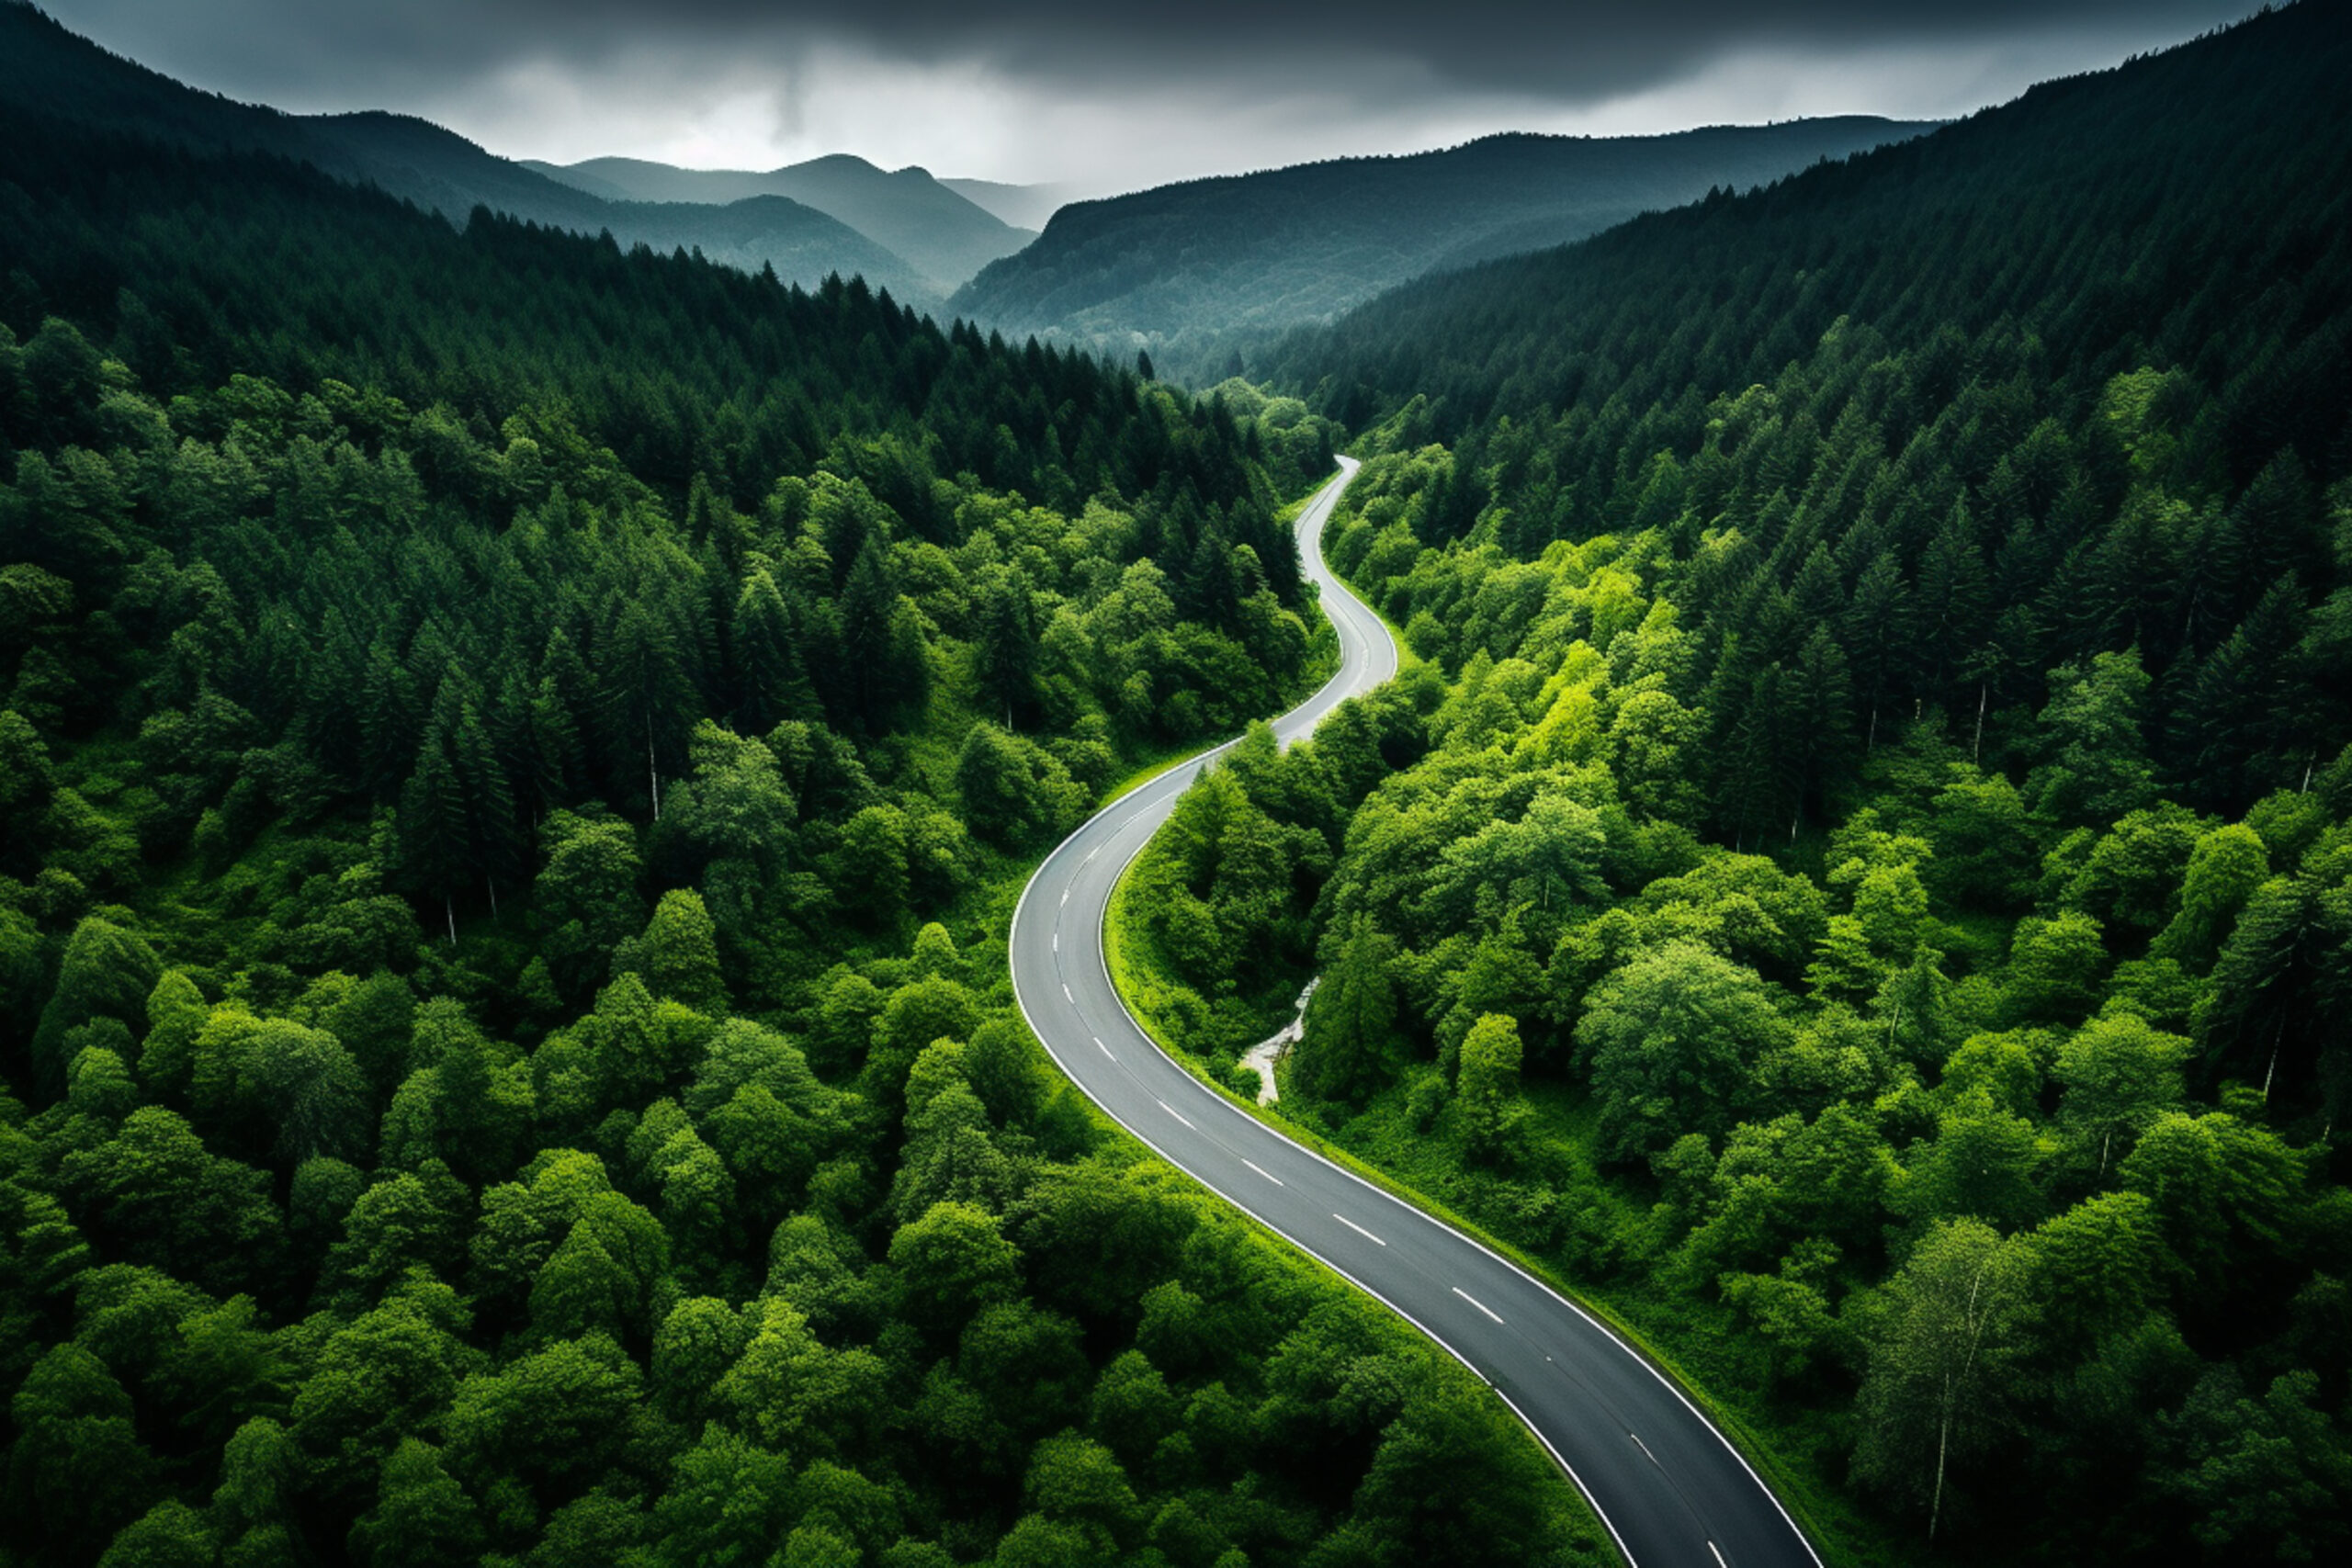 production-services-and-filming-in-slovakia-road-through-lush-forest